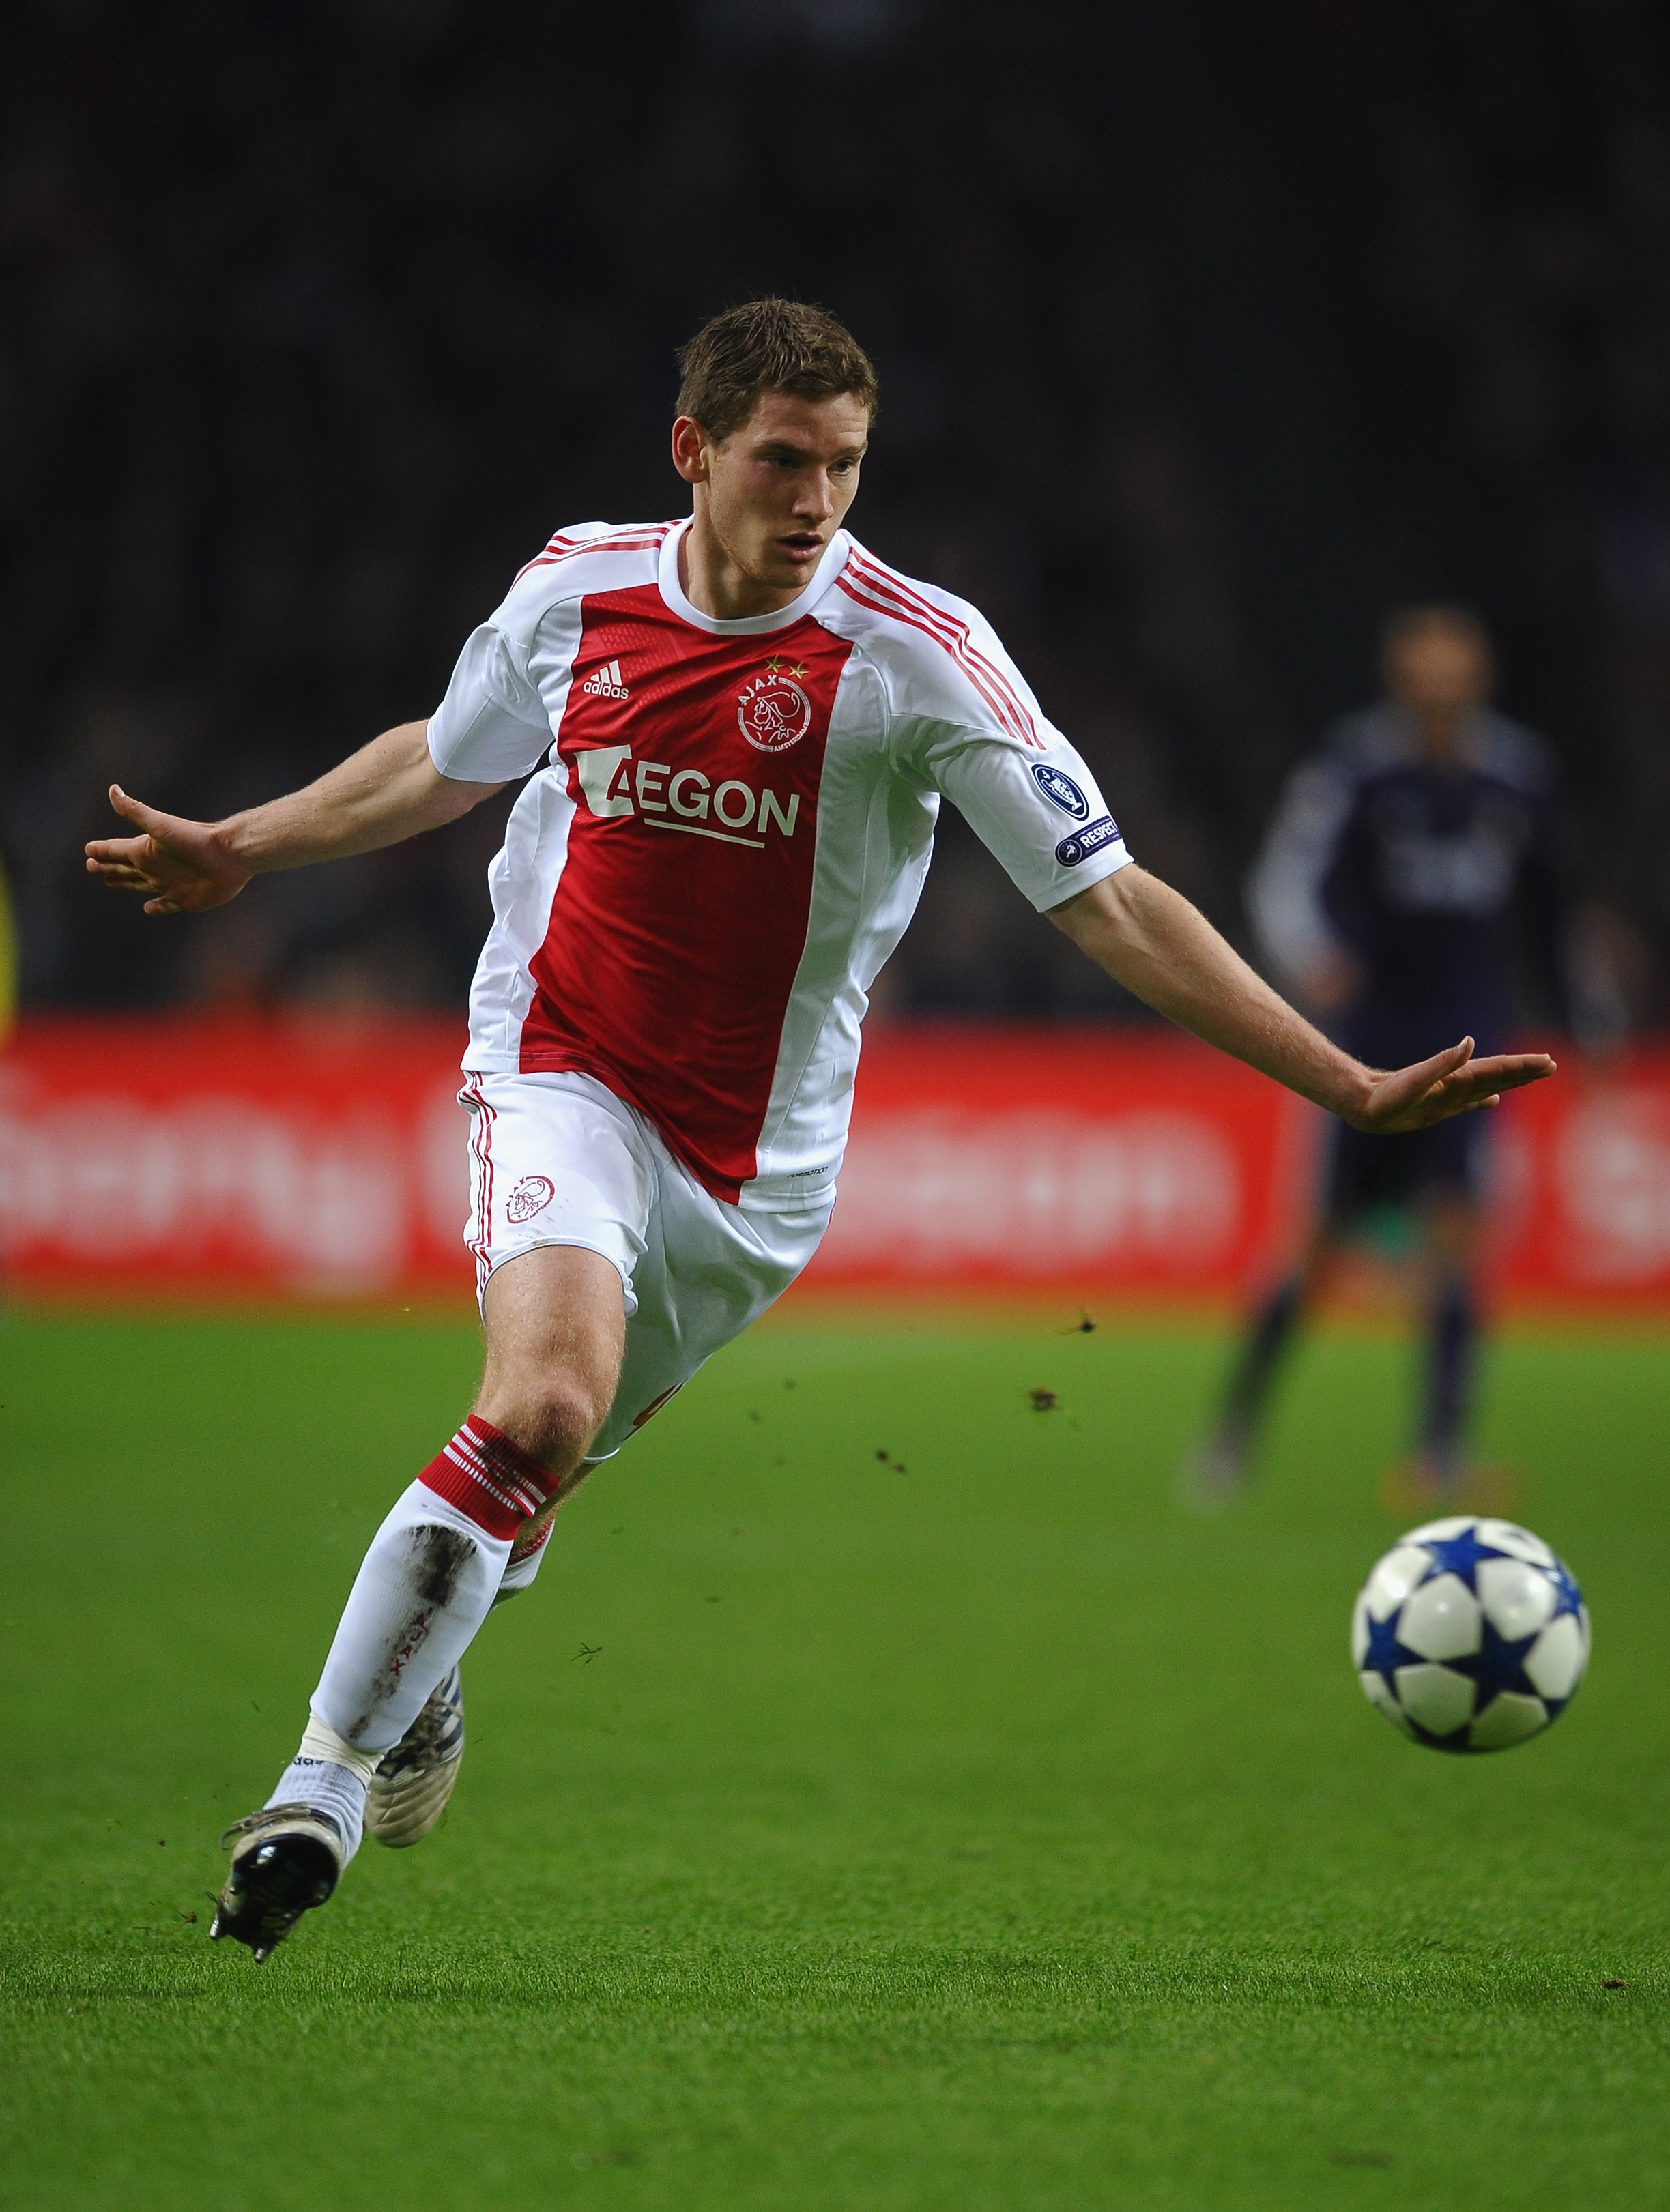 AMSTERDAM, NETHERLANDS - NOVEMBER 23: Jan Vertonghen of Ajax in action during the UEFA Champions League Group G match between AFC Ajax and Real Madrid at the Ajax Arena on November 23, 2010 in Amsterdam, Netherlands.  (Photo by Laurence Griffiths/Getty Im